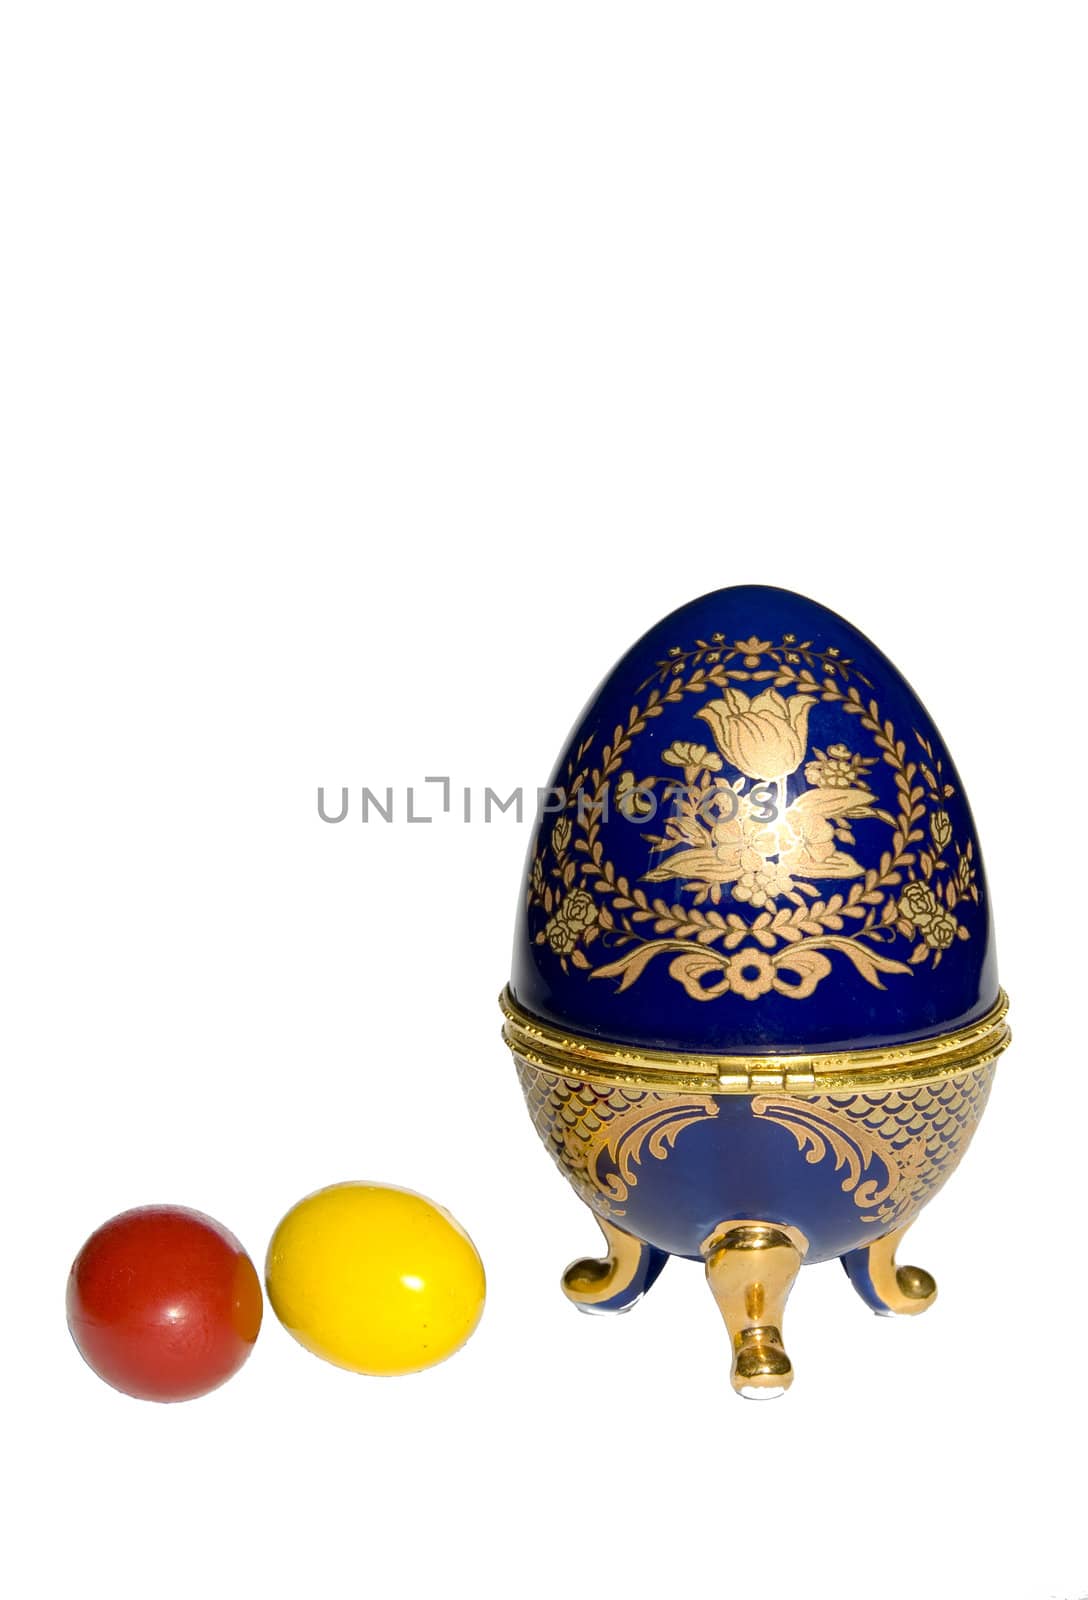 Faberge copy and two Easter eggs by sauletas